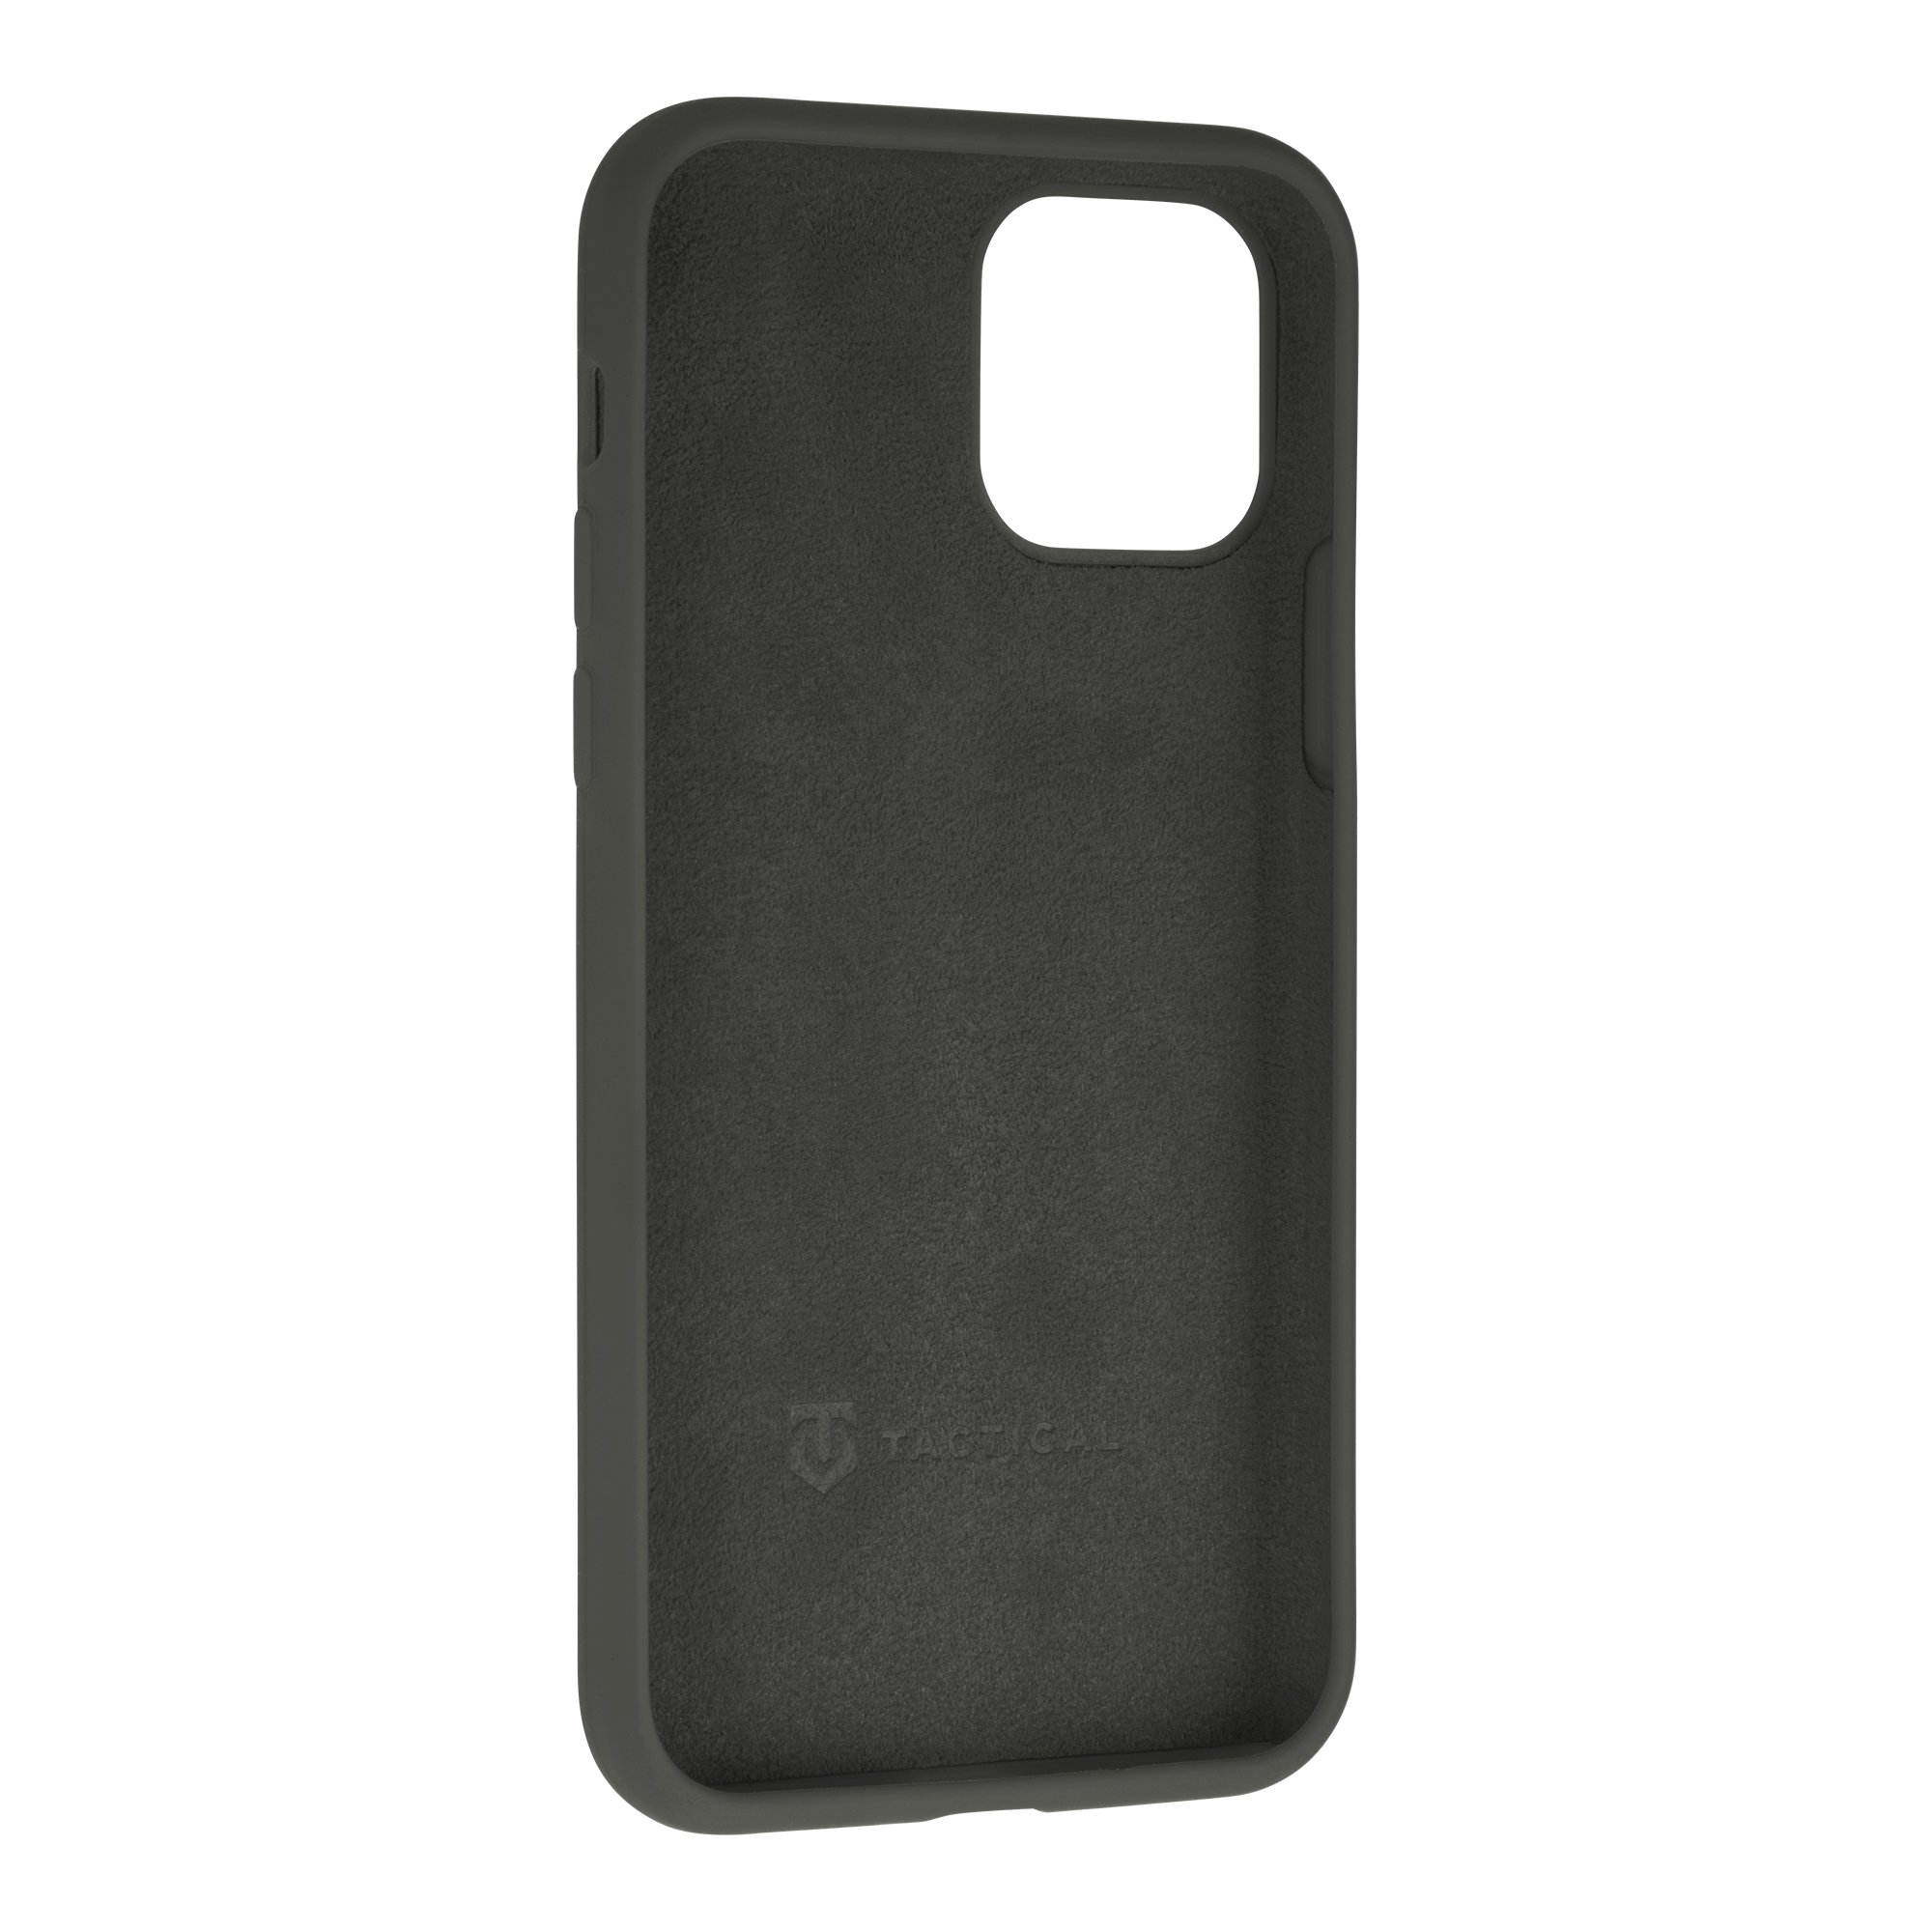 Tactical iPhone 12/iPhone 12 Pro Velvet Smoothie Cover - 8596311121449 - Bazooka